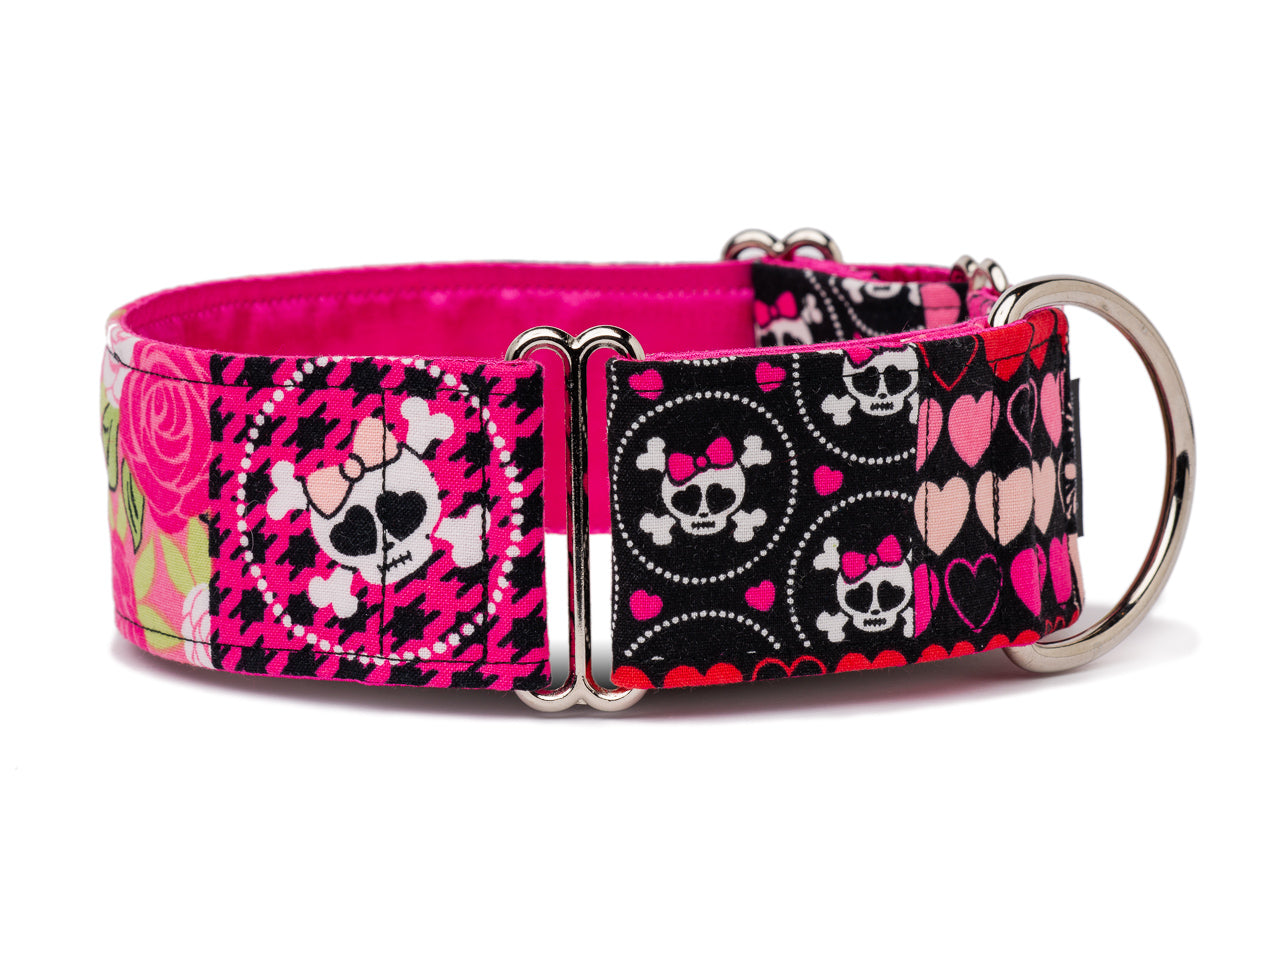 If your four-legged fashionista is a rebel at heart, this pink and black skull and heart collar is the sweet and sassy style solution!